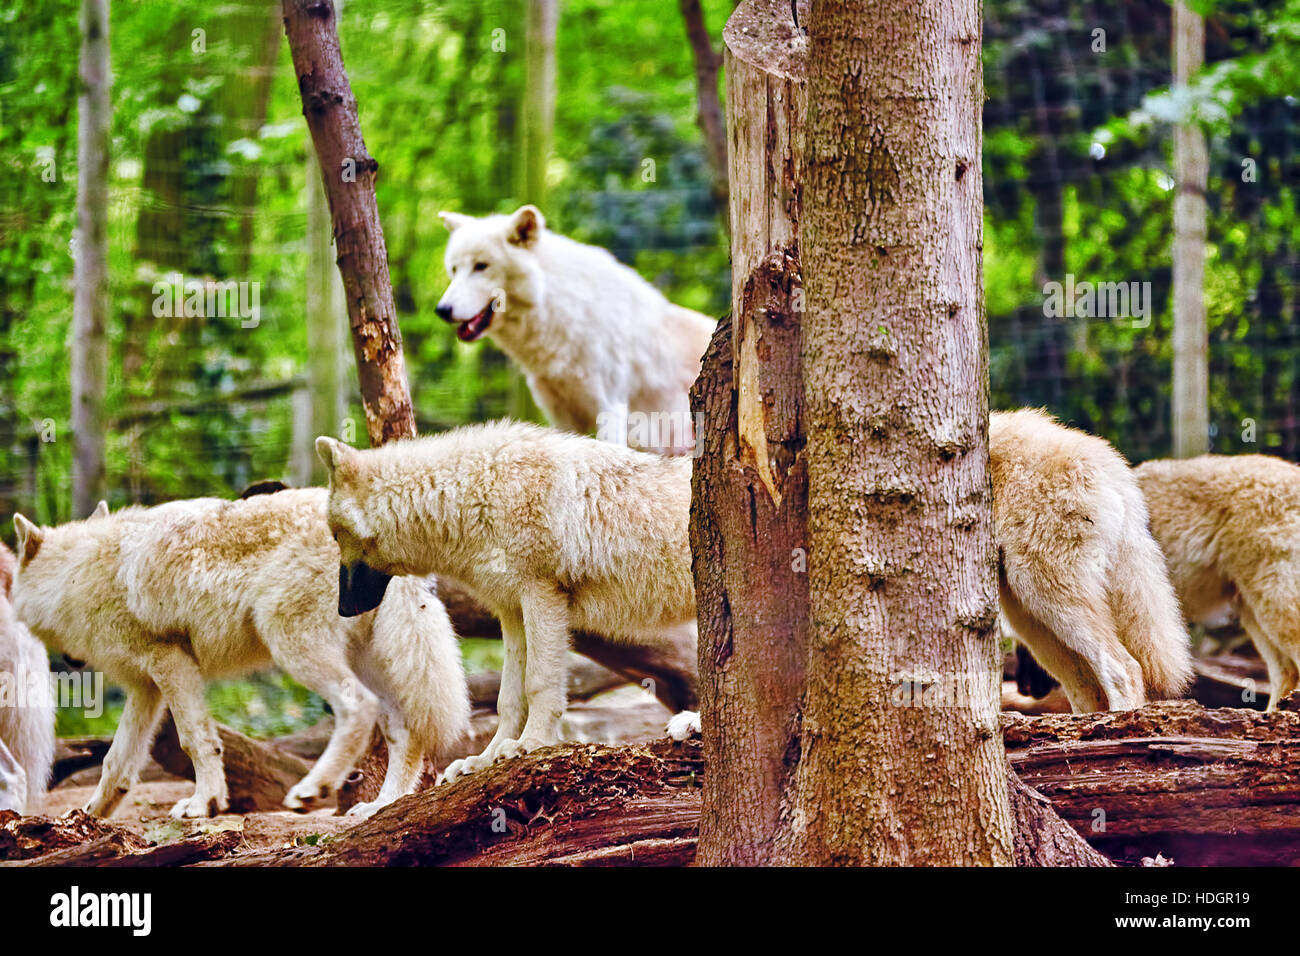 Pack of gray wolves (canis lupus) in its natural habitat. Stock Photo